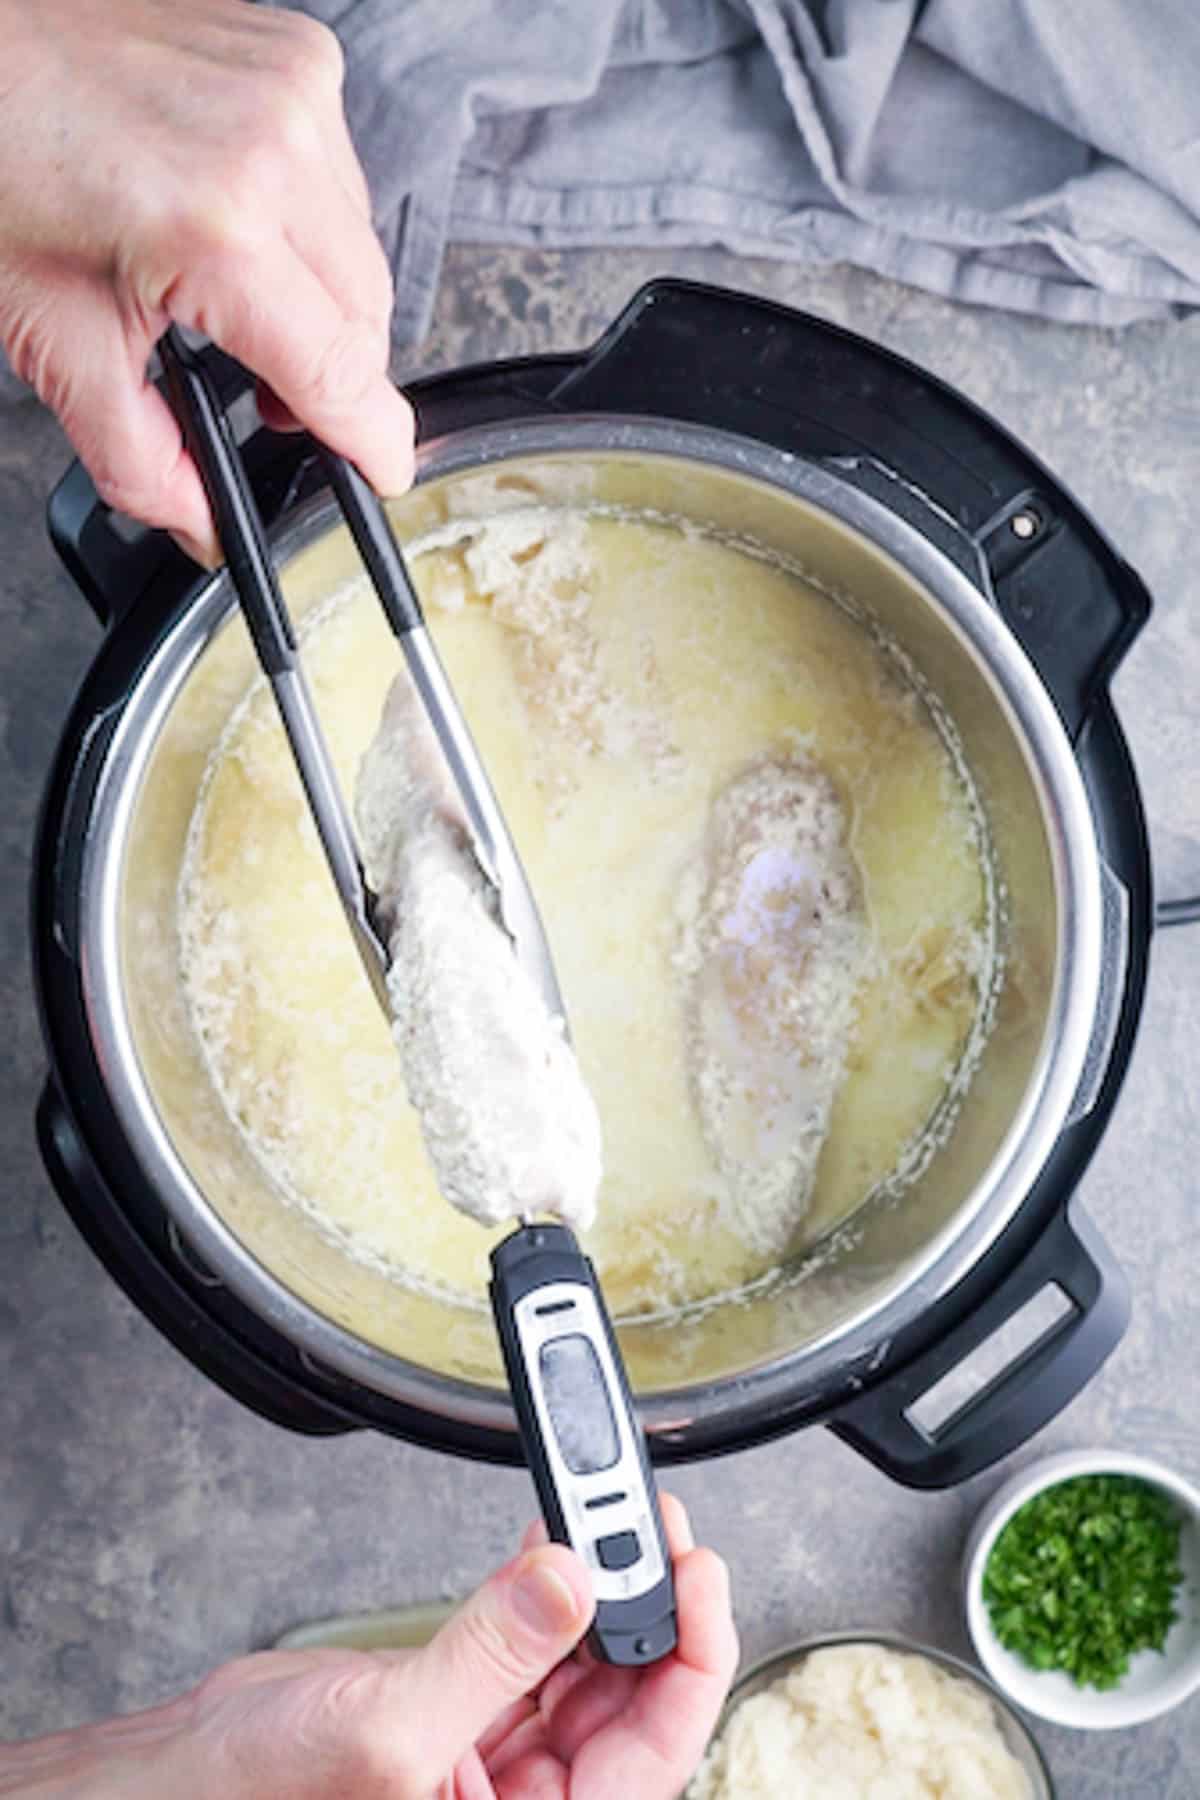 meat thermometer inserted in cooked chicken breast inside Instant Pot